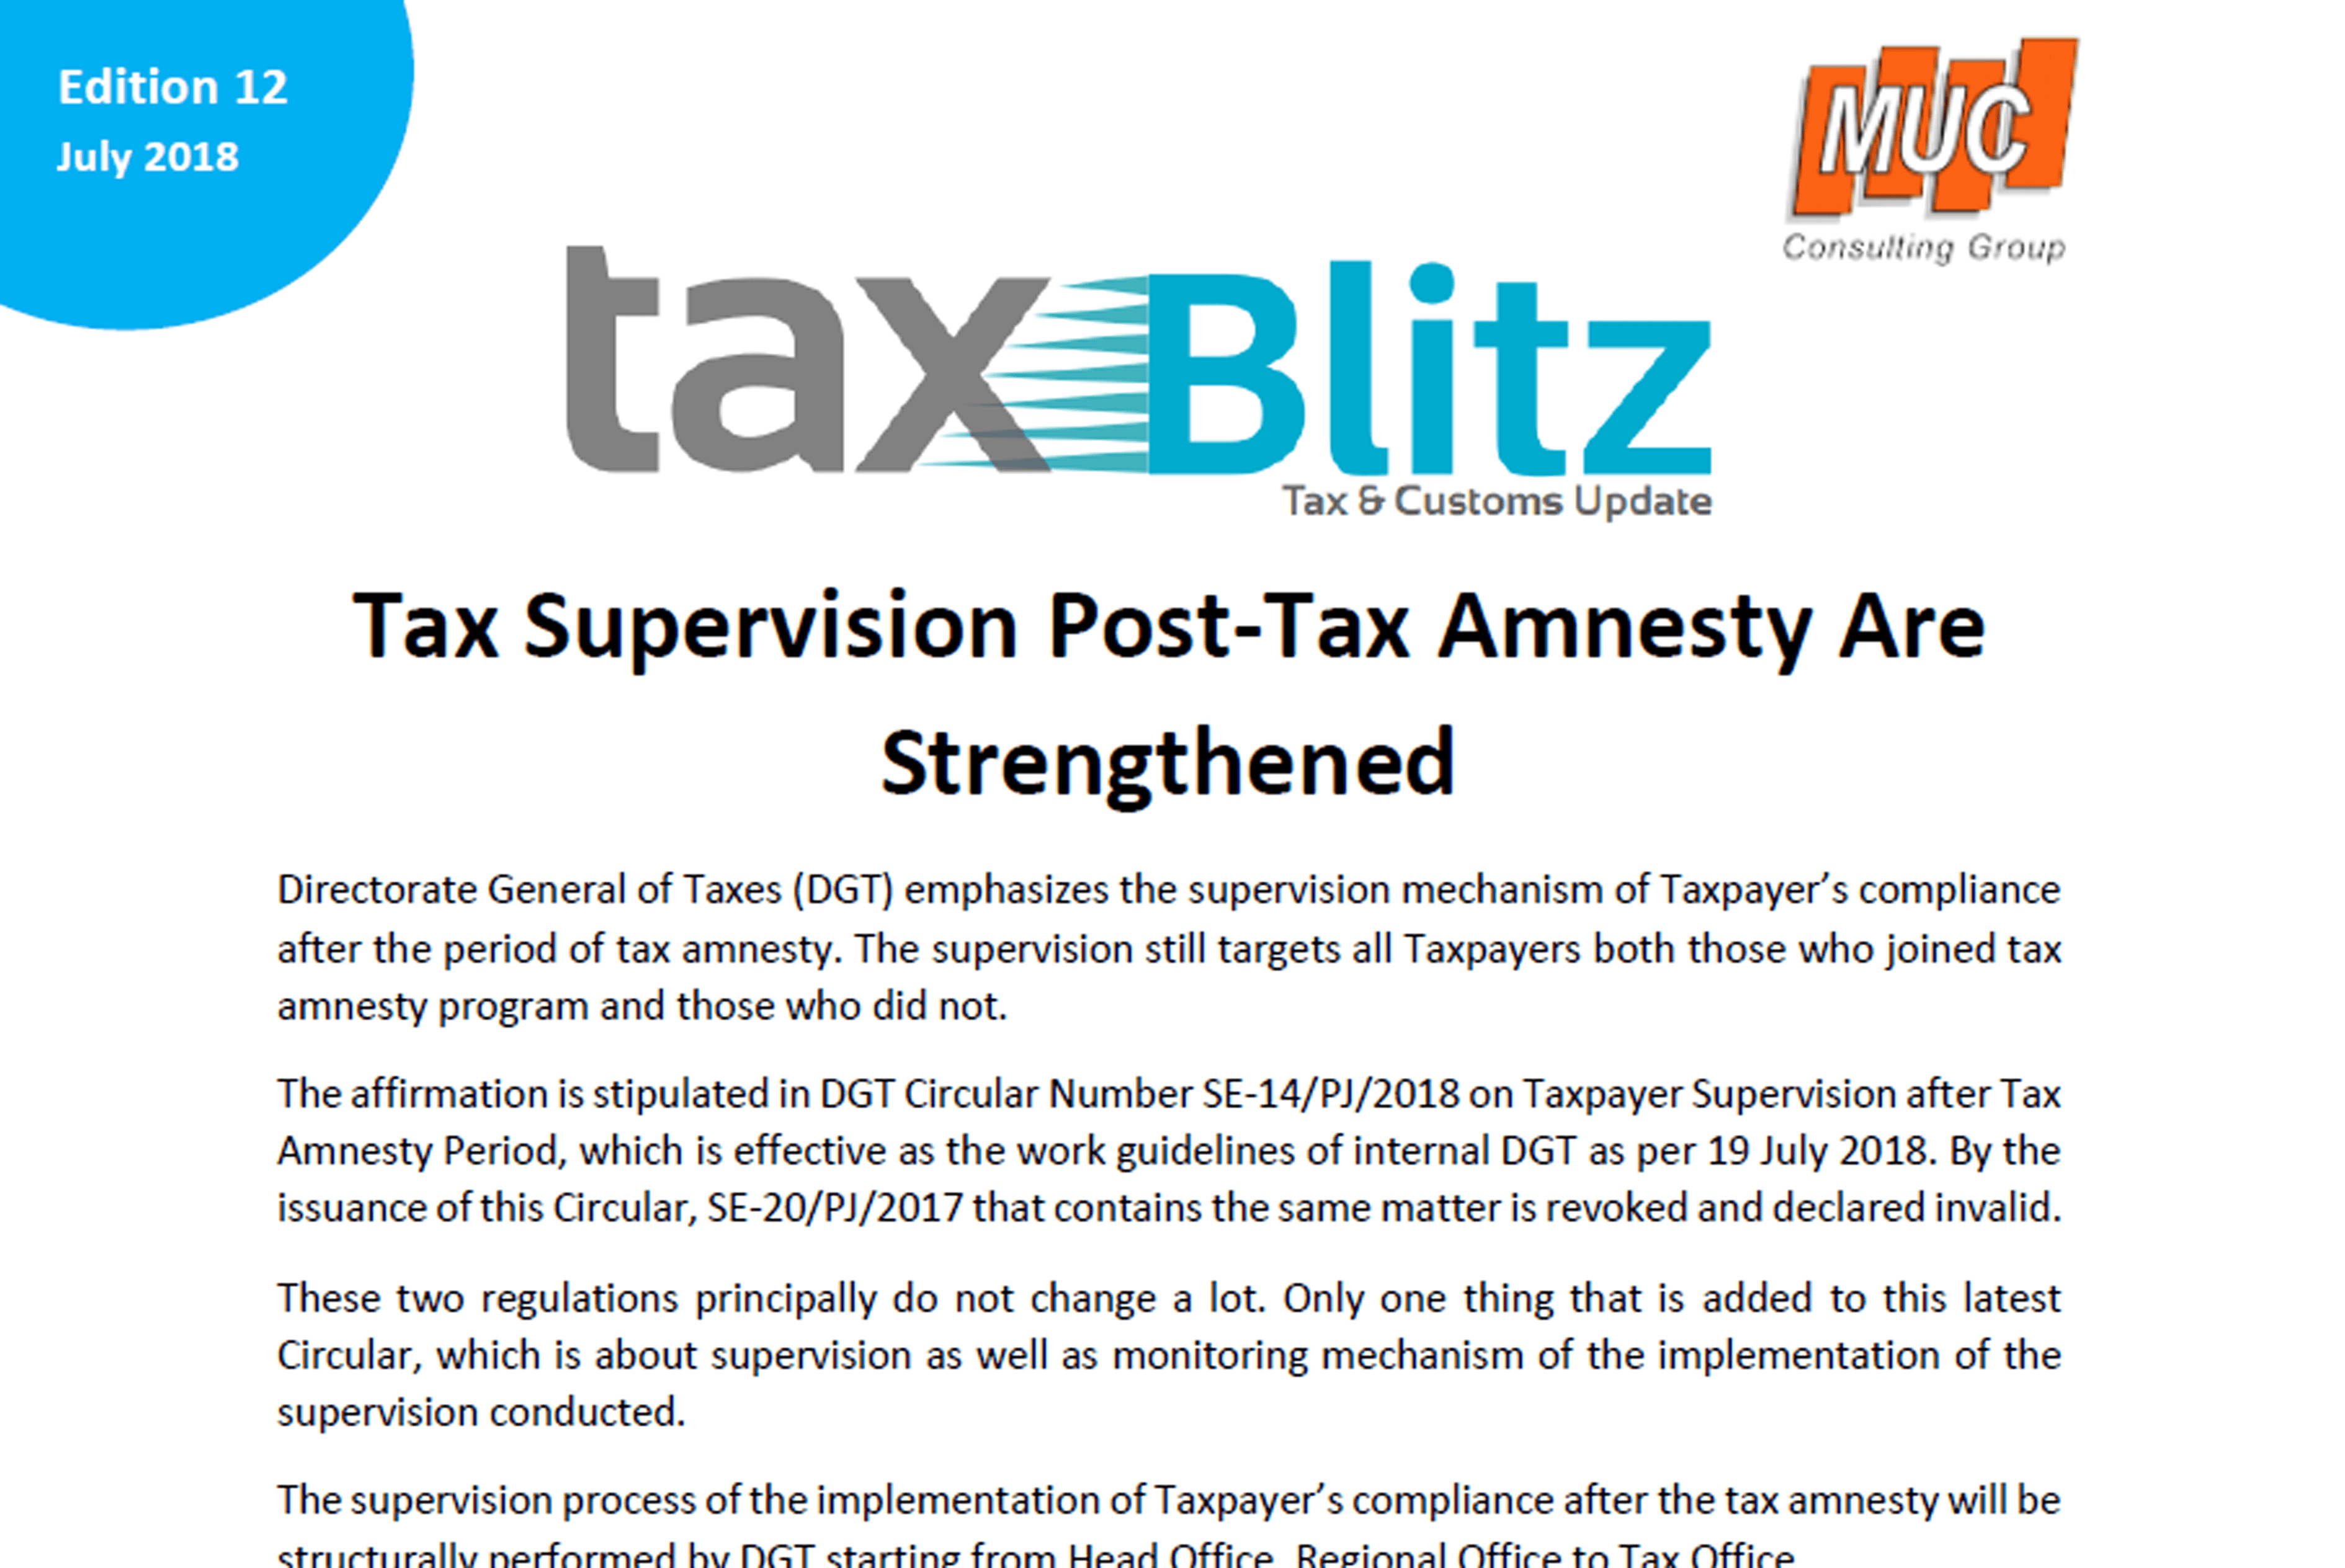 Tax Supervision Post-Tax Amnesty Are Strengthened